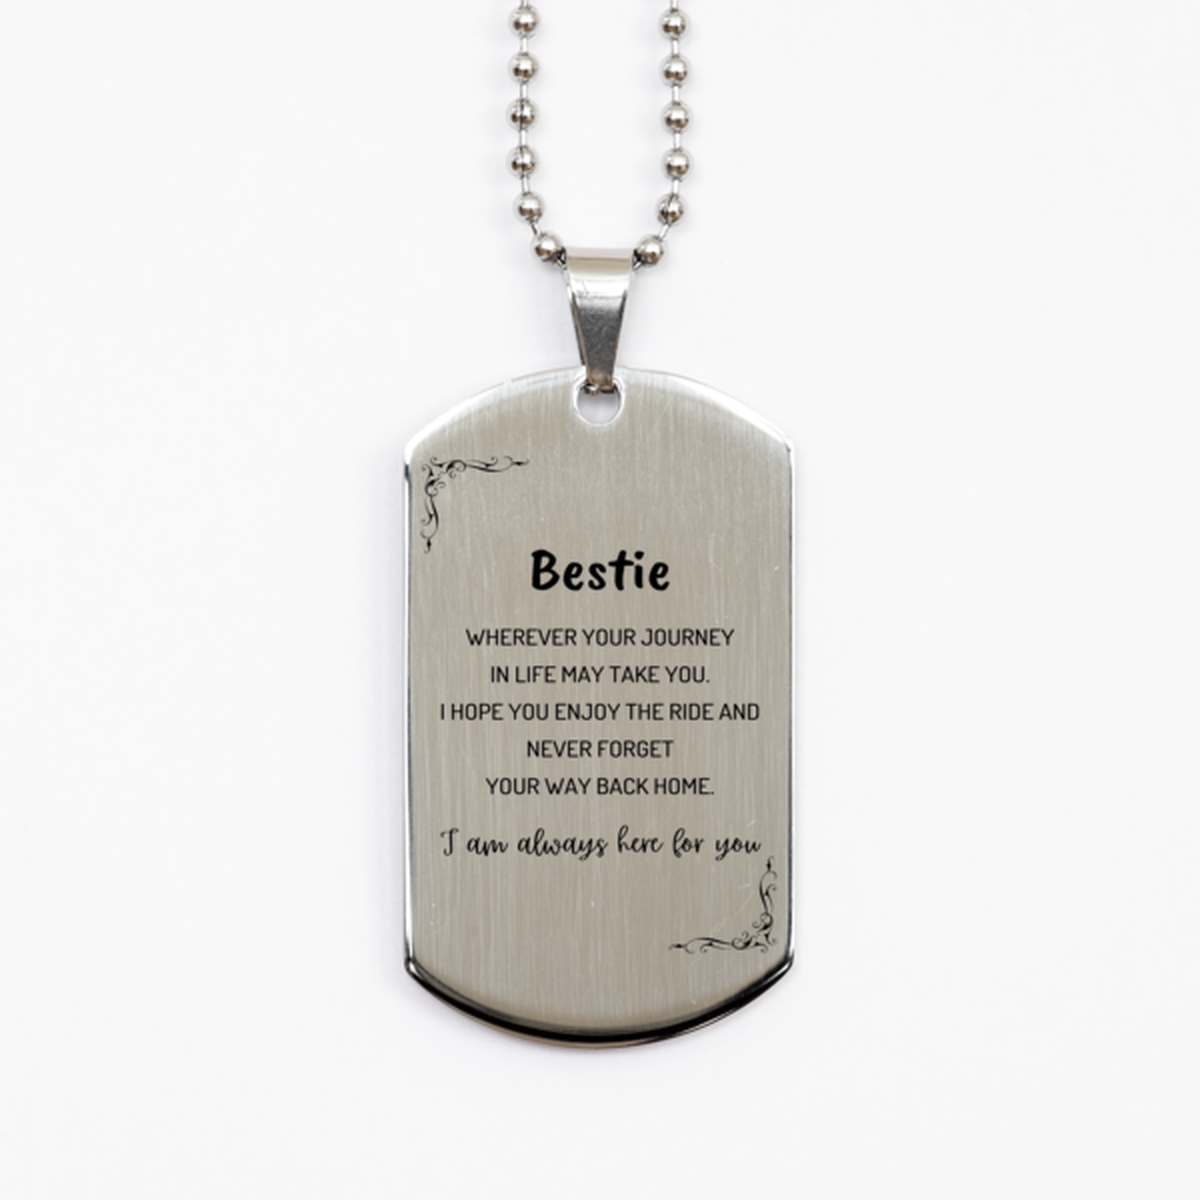 Bestie wherever your journey in life may take you, I am always here for you Bestie Silver Dog Tag, Awesome Christmas Gifts For Bestie, Bestie Birthday Gifts for Men Women Family Loved One